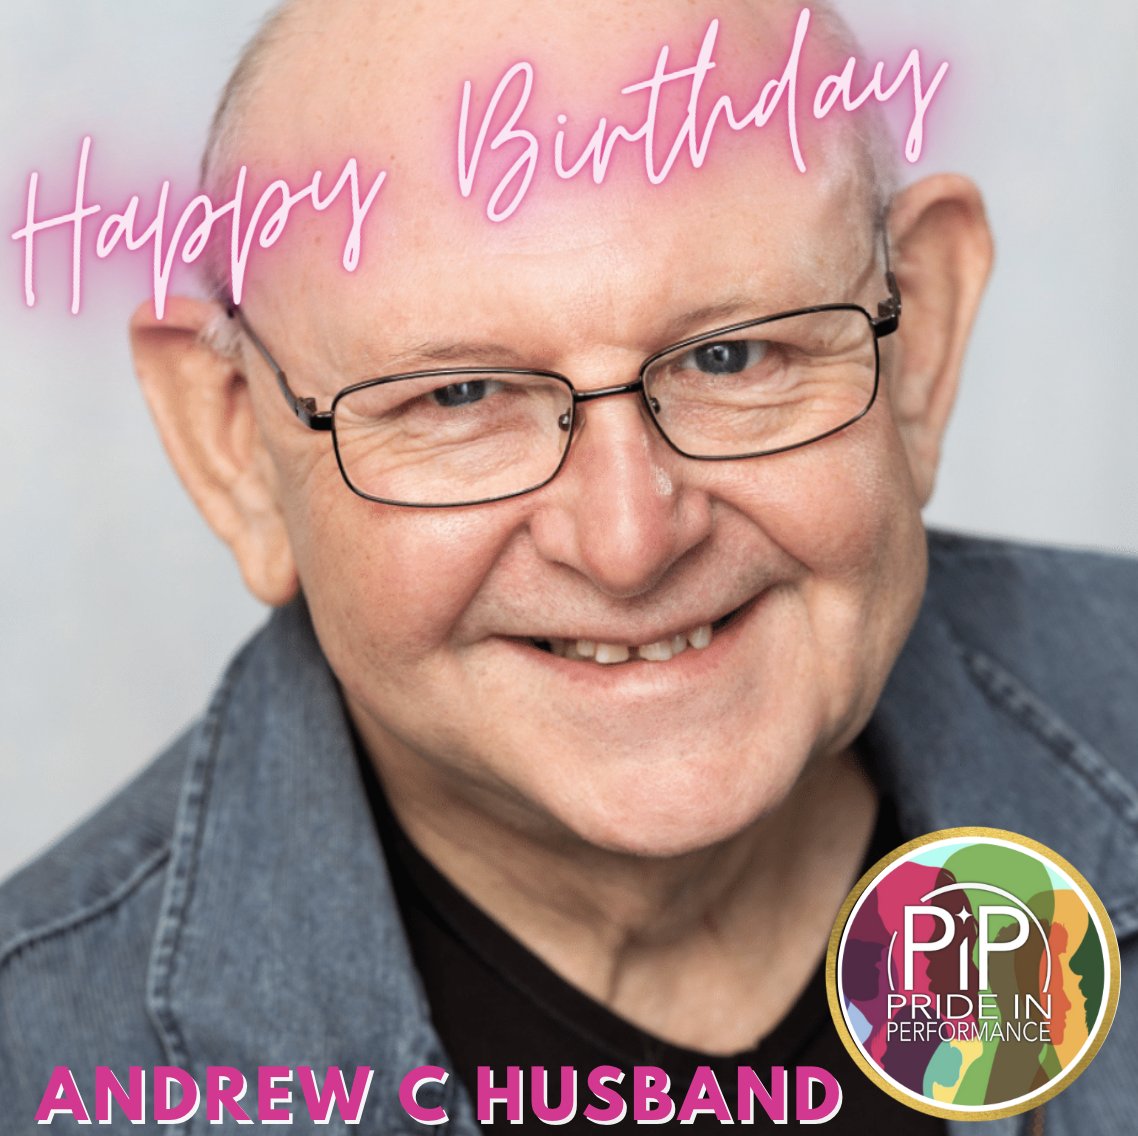 🎂 HAPPY BIRTHDAY ANDREW C HUSBAND🎂 We love #PiPster #Actor @AndrewCHusband as it’s his birthday please take a moment to wish him well! spotlight.com/3877-9051-3200 #Casting #ActorsLife #BirthdayTime